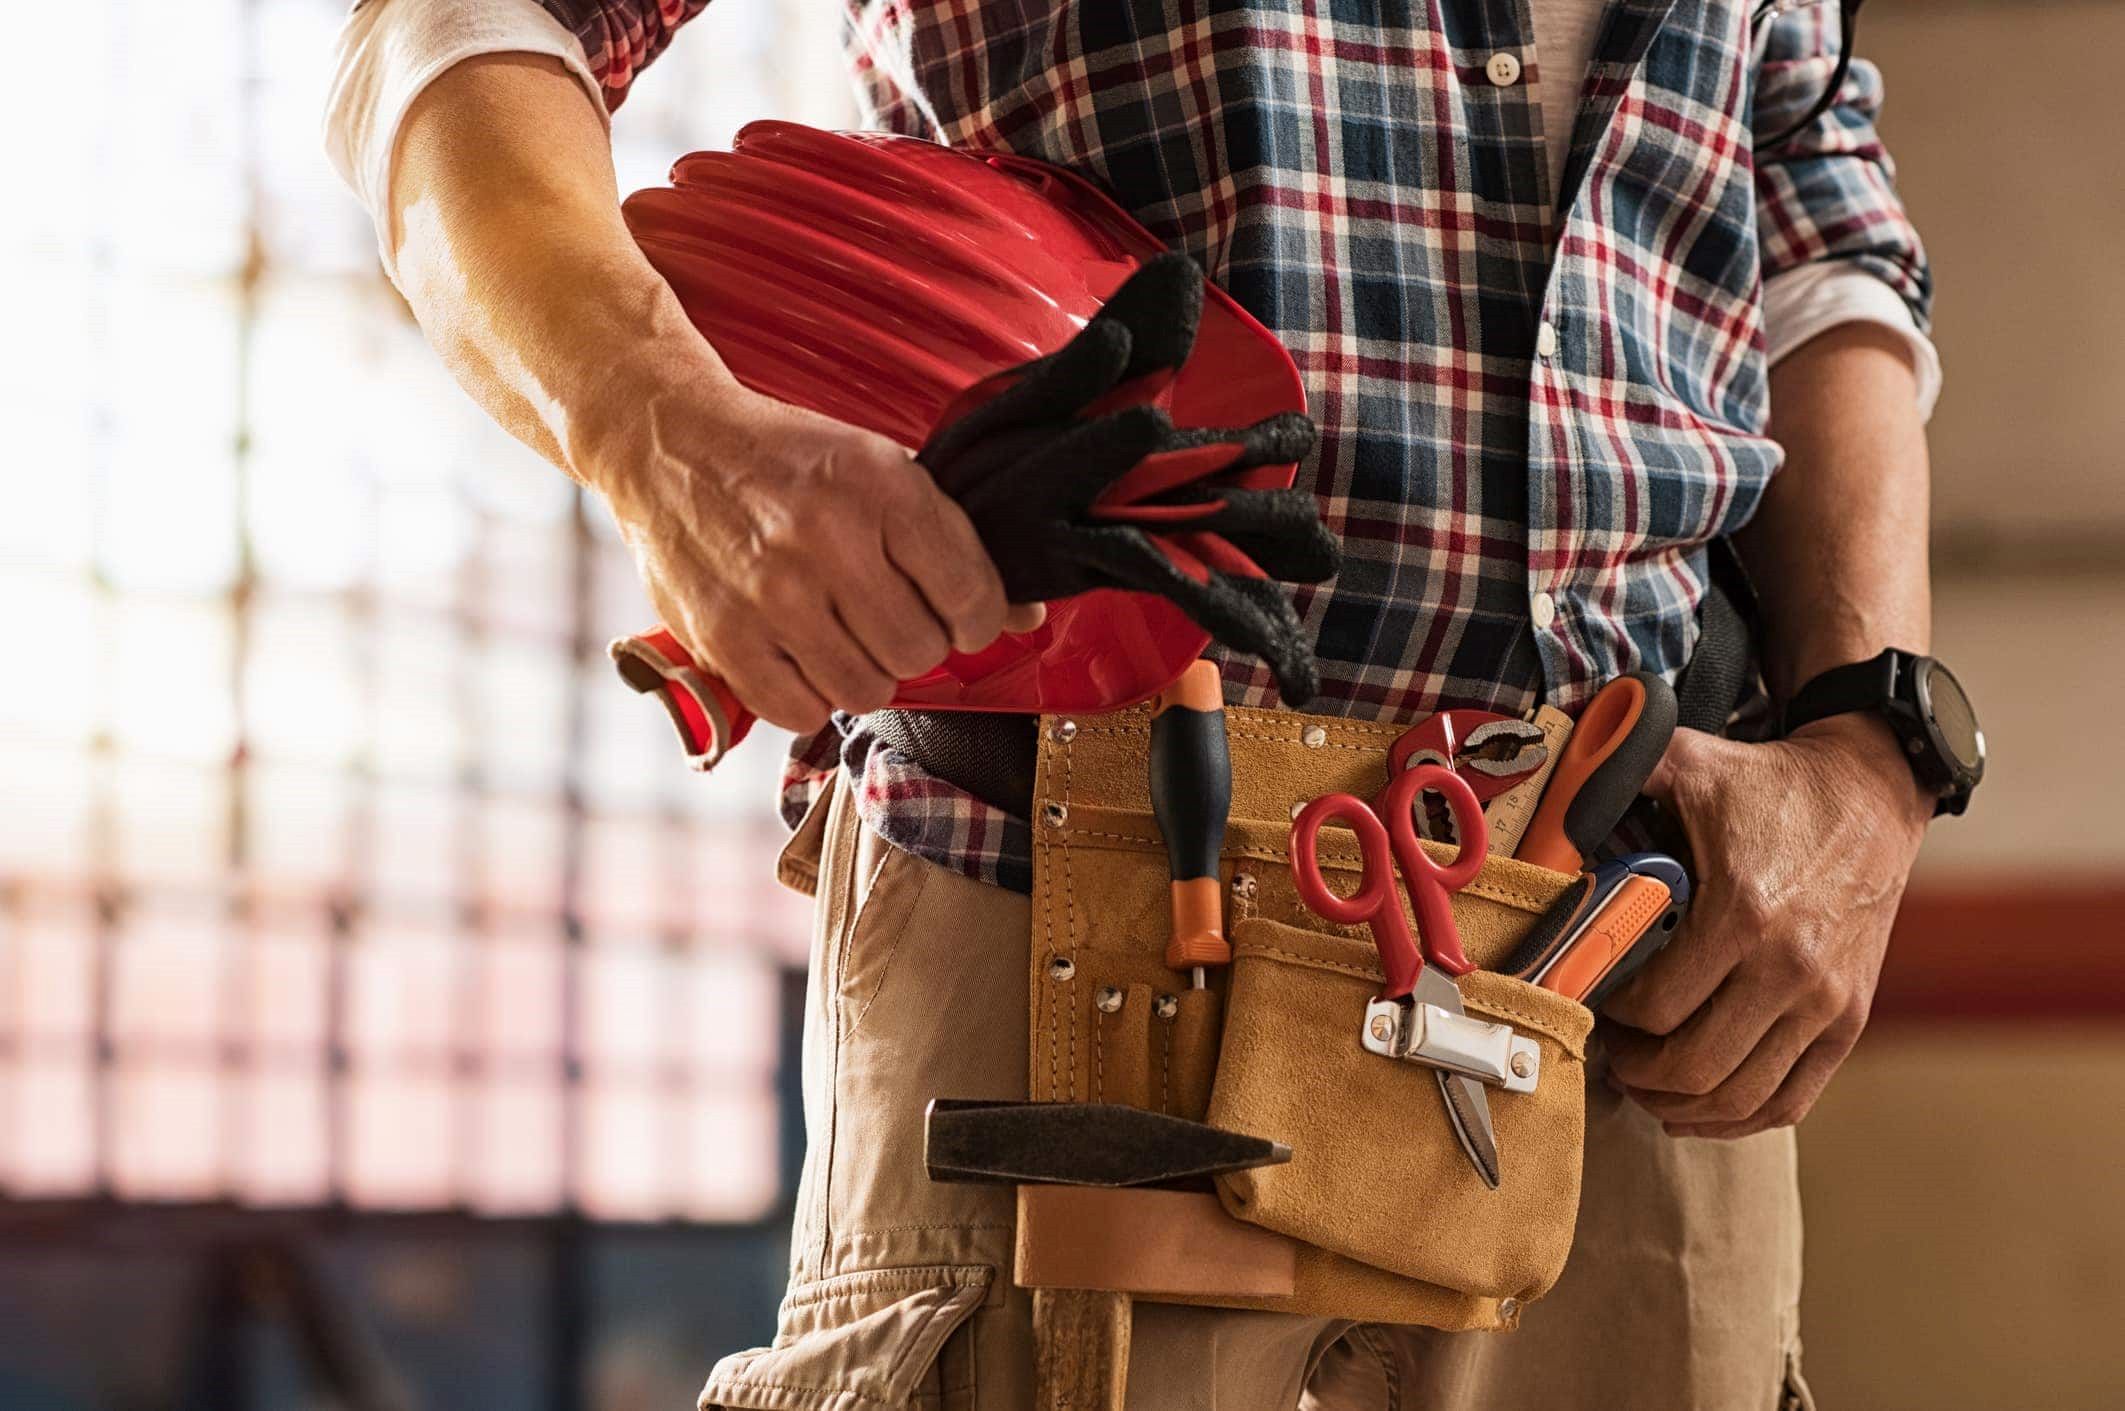 Should You Tip Home Maintenance Workers Who Fix Your Walls